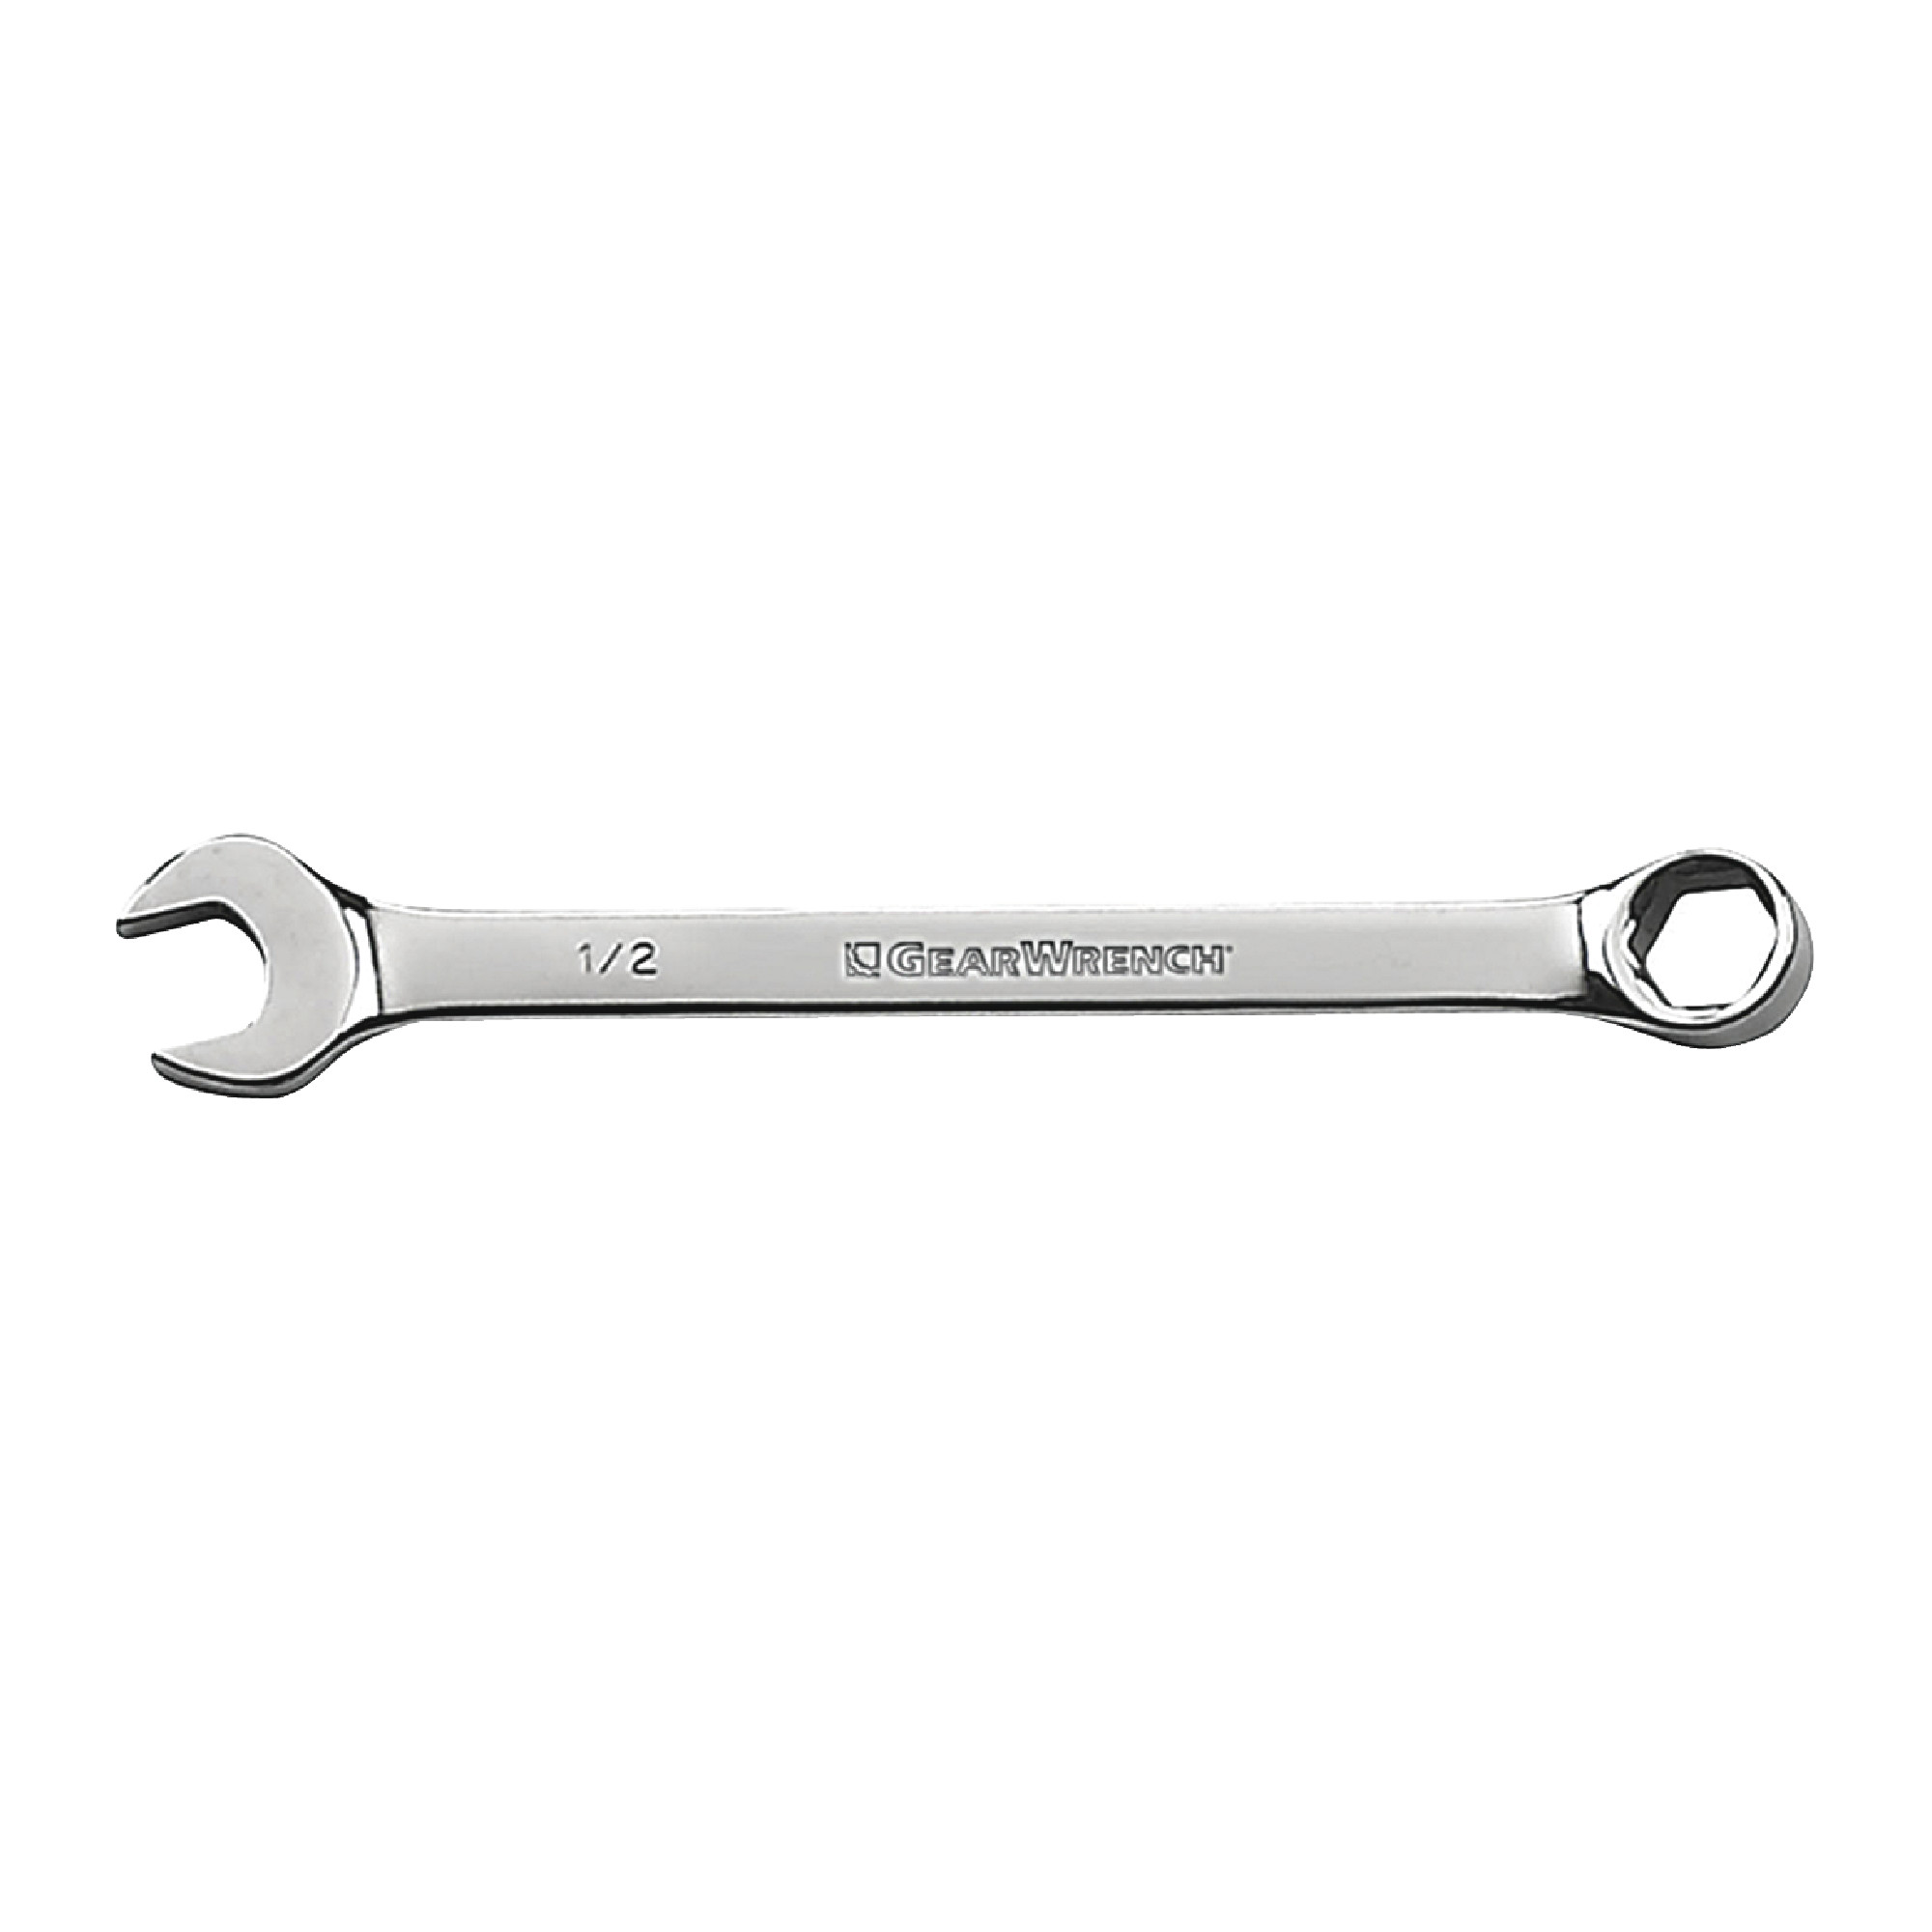 5/8" 6 Point Combination Wrench